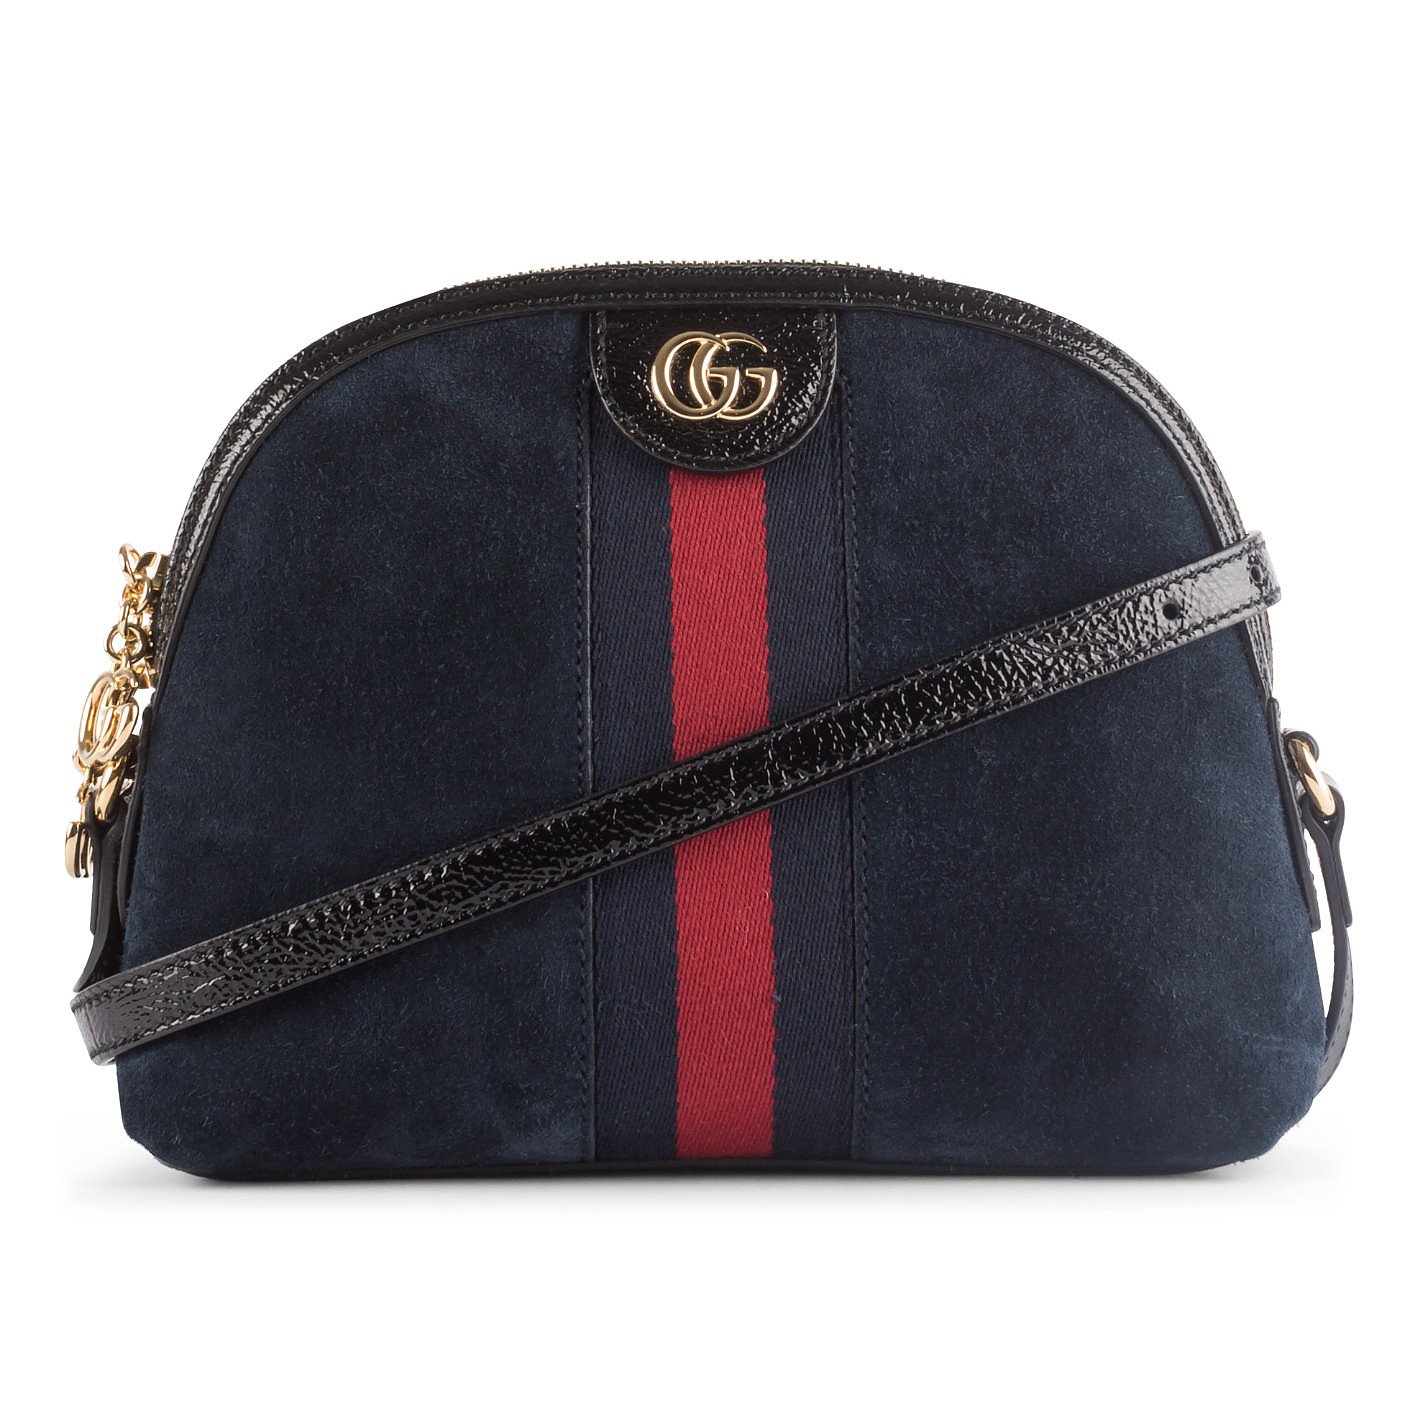 Rent or Buy Gucci Dome Ophidia Small Suede Shoulder Bag from www.neverfullmm.com